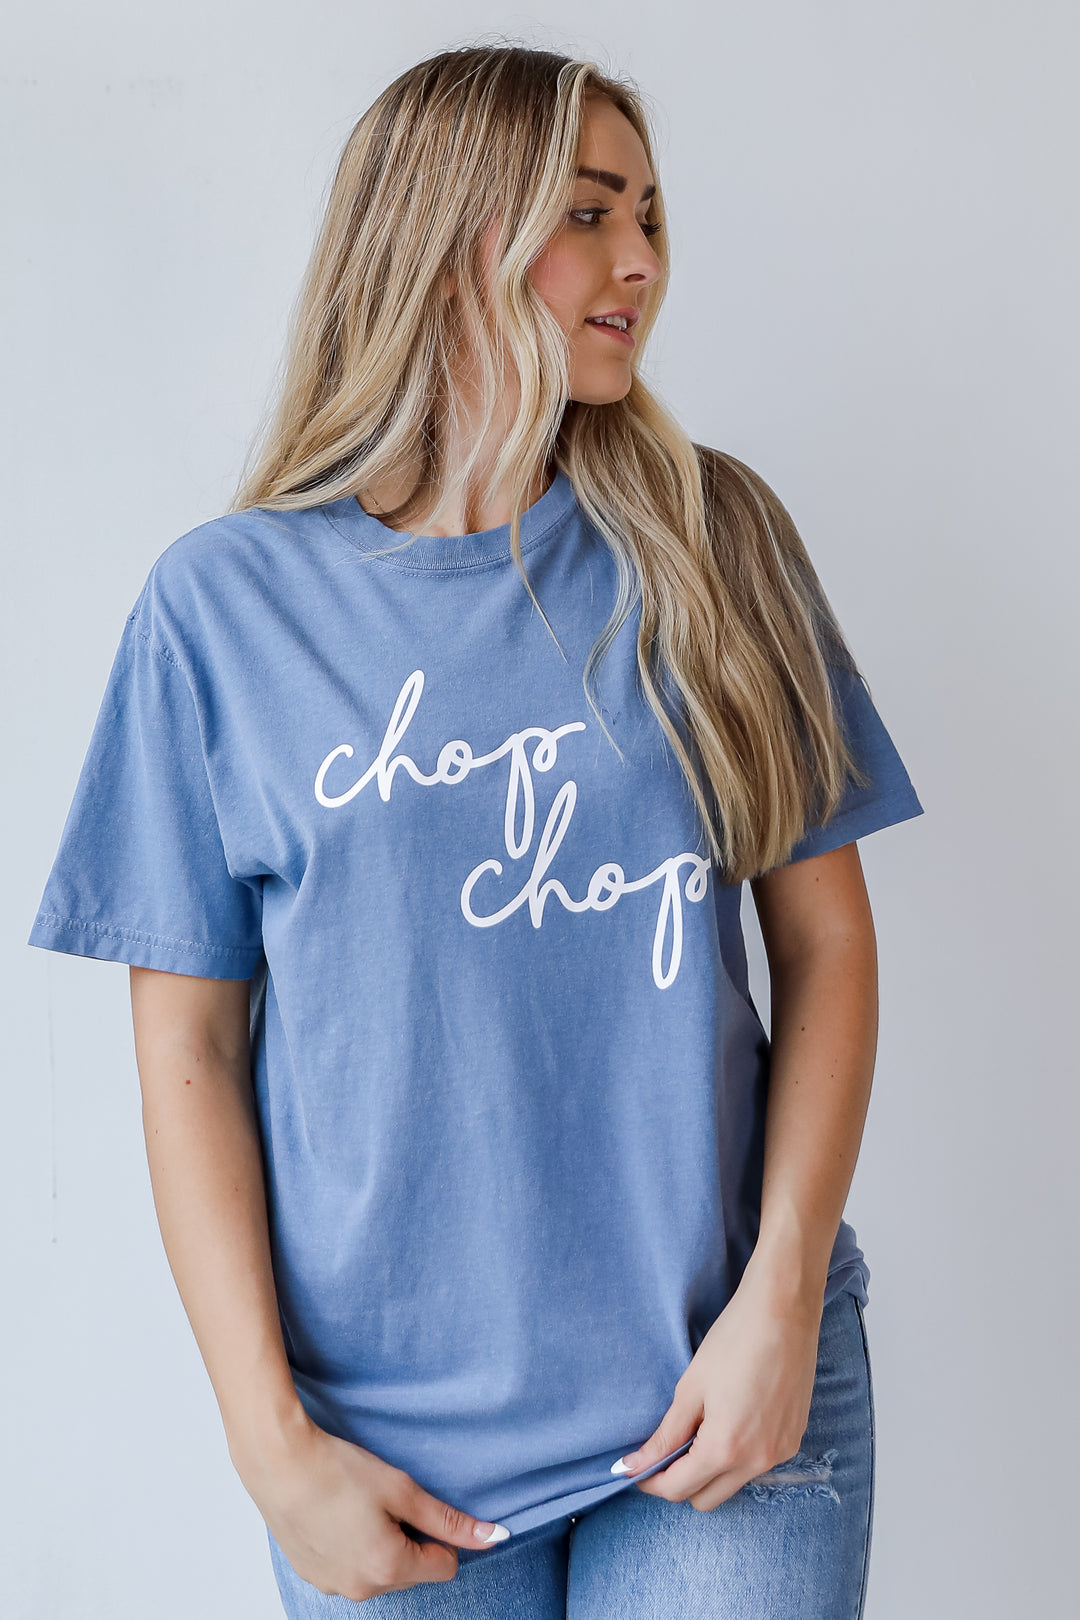 Chop Chop Tee front view